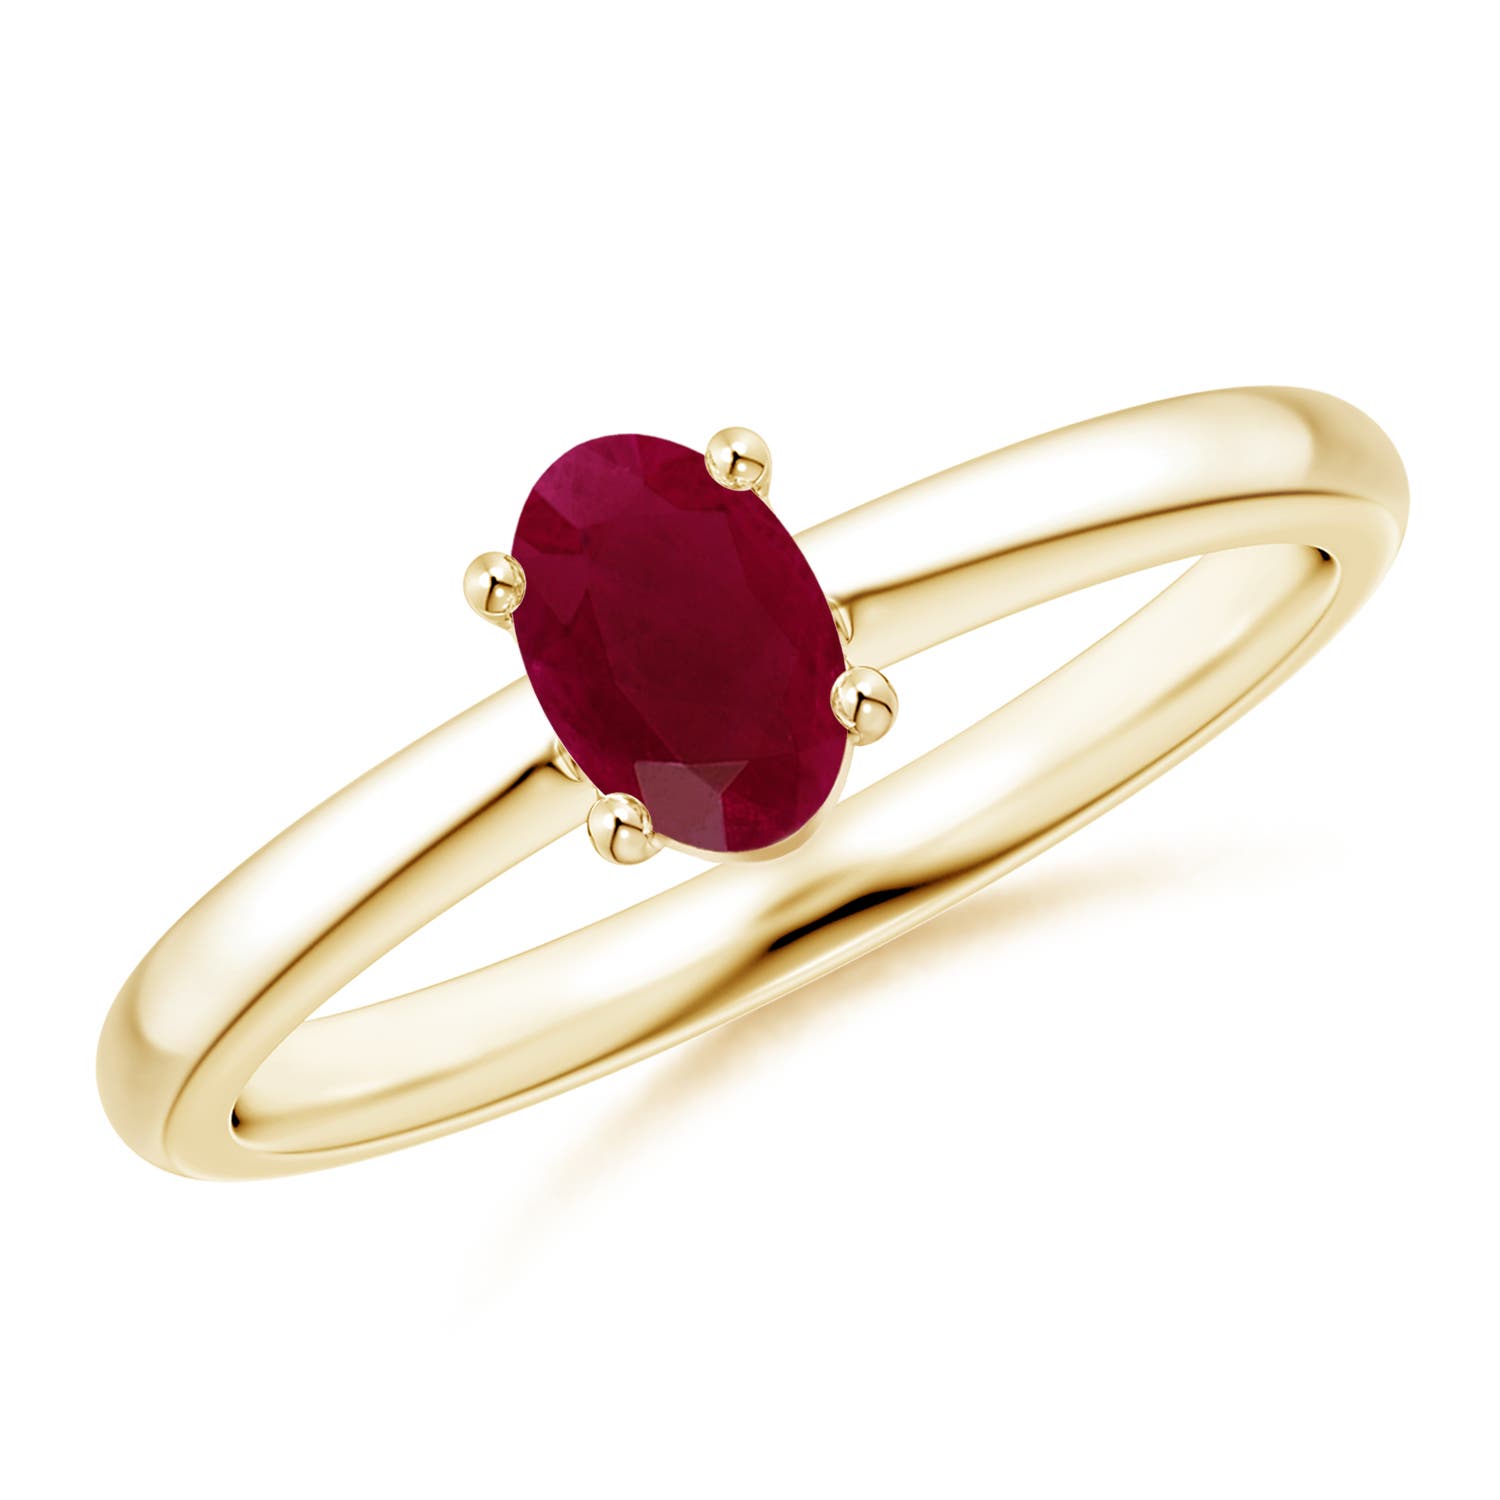 A - Ruby / 0.6 CT / 14 KT Yellow Gold